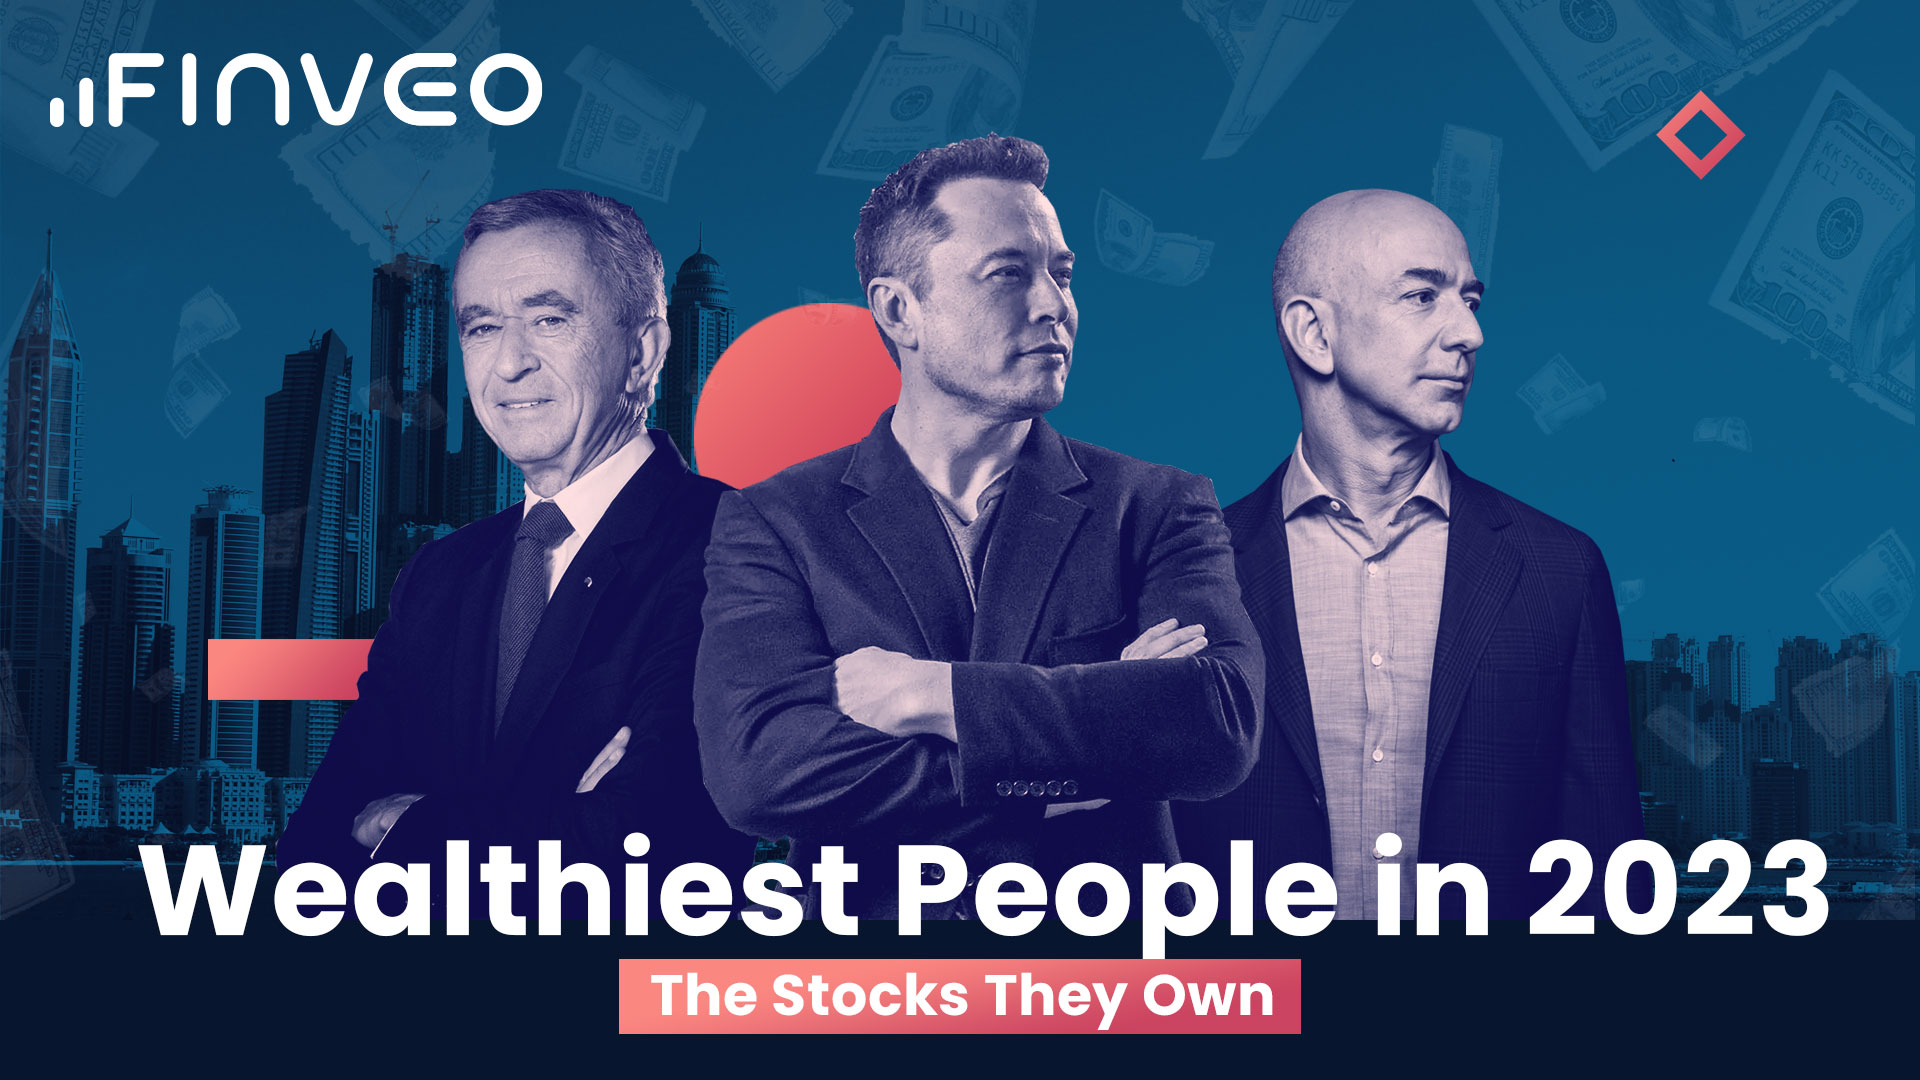 3 Wealthiest People in 2023: The Stocks They Own 